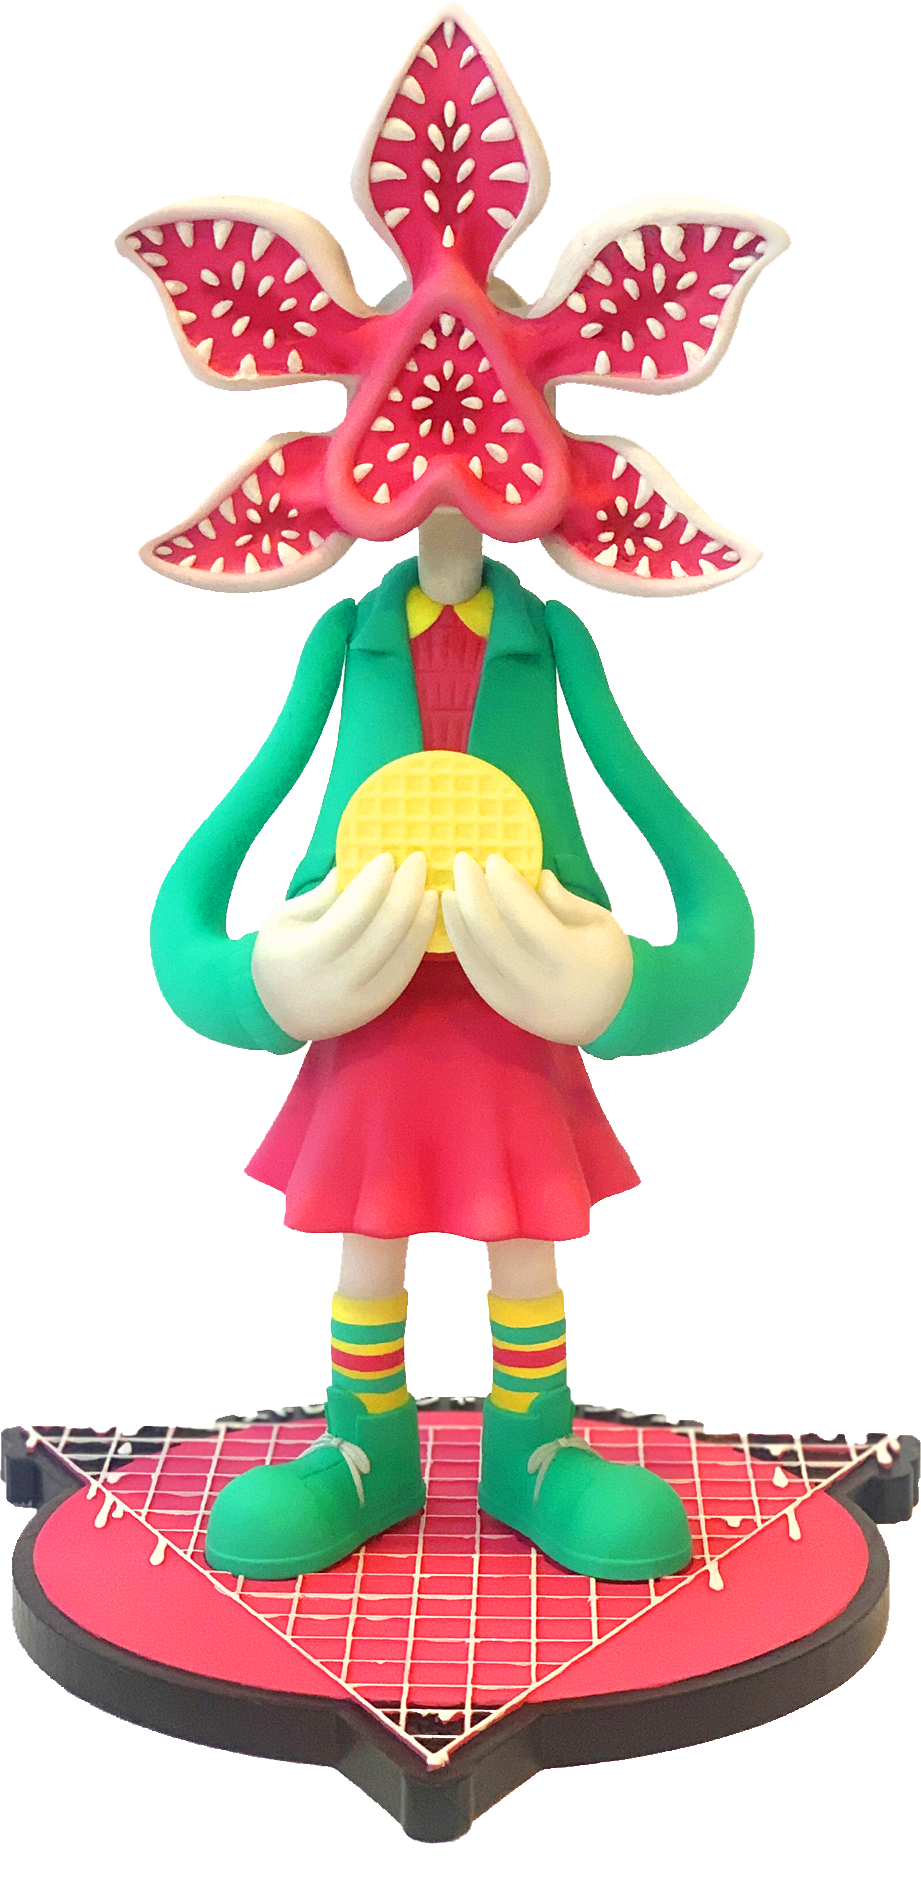 A pink and sea green and yellow and white figure with a Venus flytrap like head that depicts Elegorgon from Stranger Things